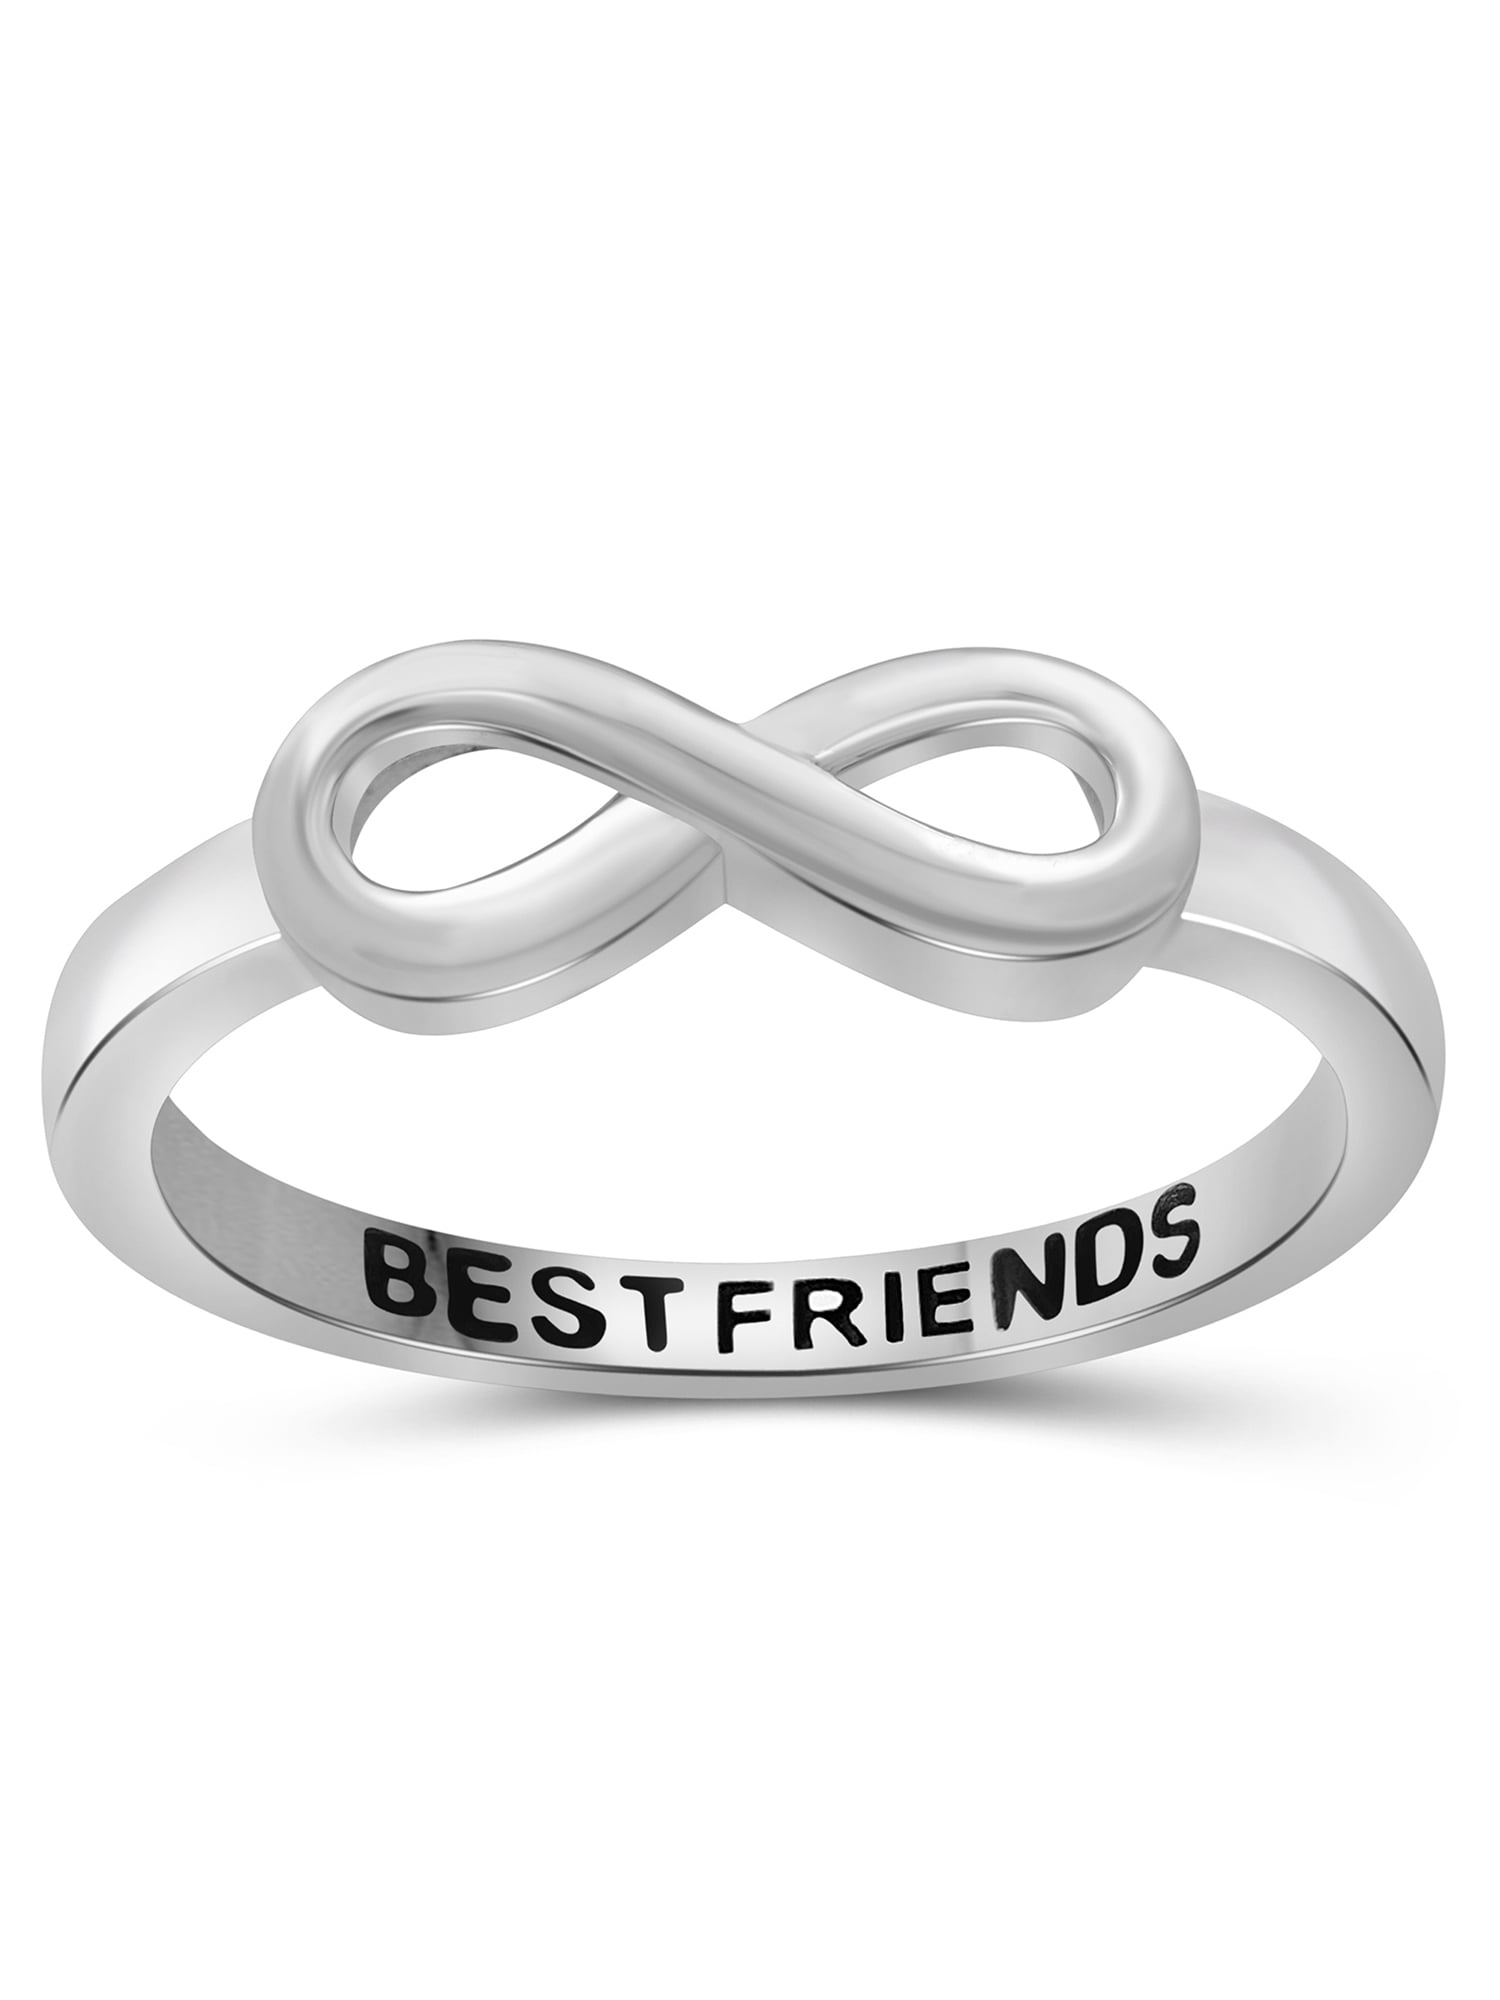 JewelersClub 0 925 Sterling Silver Infinity Friendship Ring for Women Personalized Best Friends Eternity Knot Symbol Band 7ce28597 934c 4f89 b02c 2633d14b323d.feef4c8c5dd1ac8ddce0558c71e0bb94